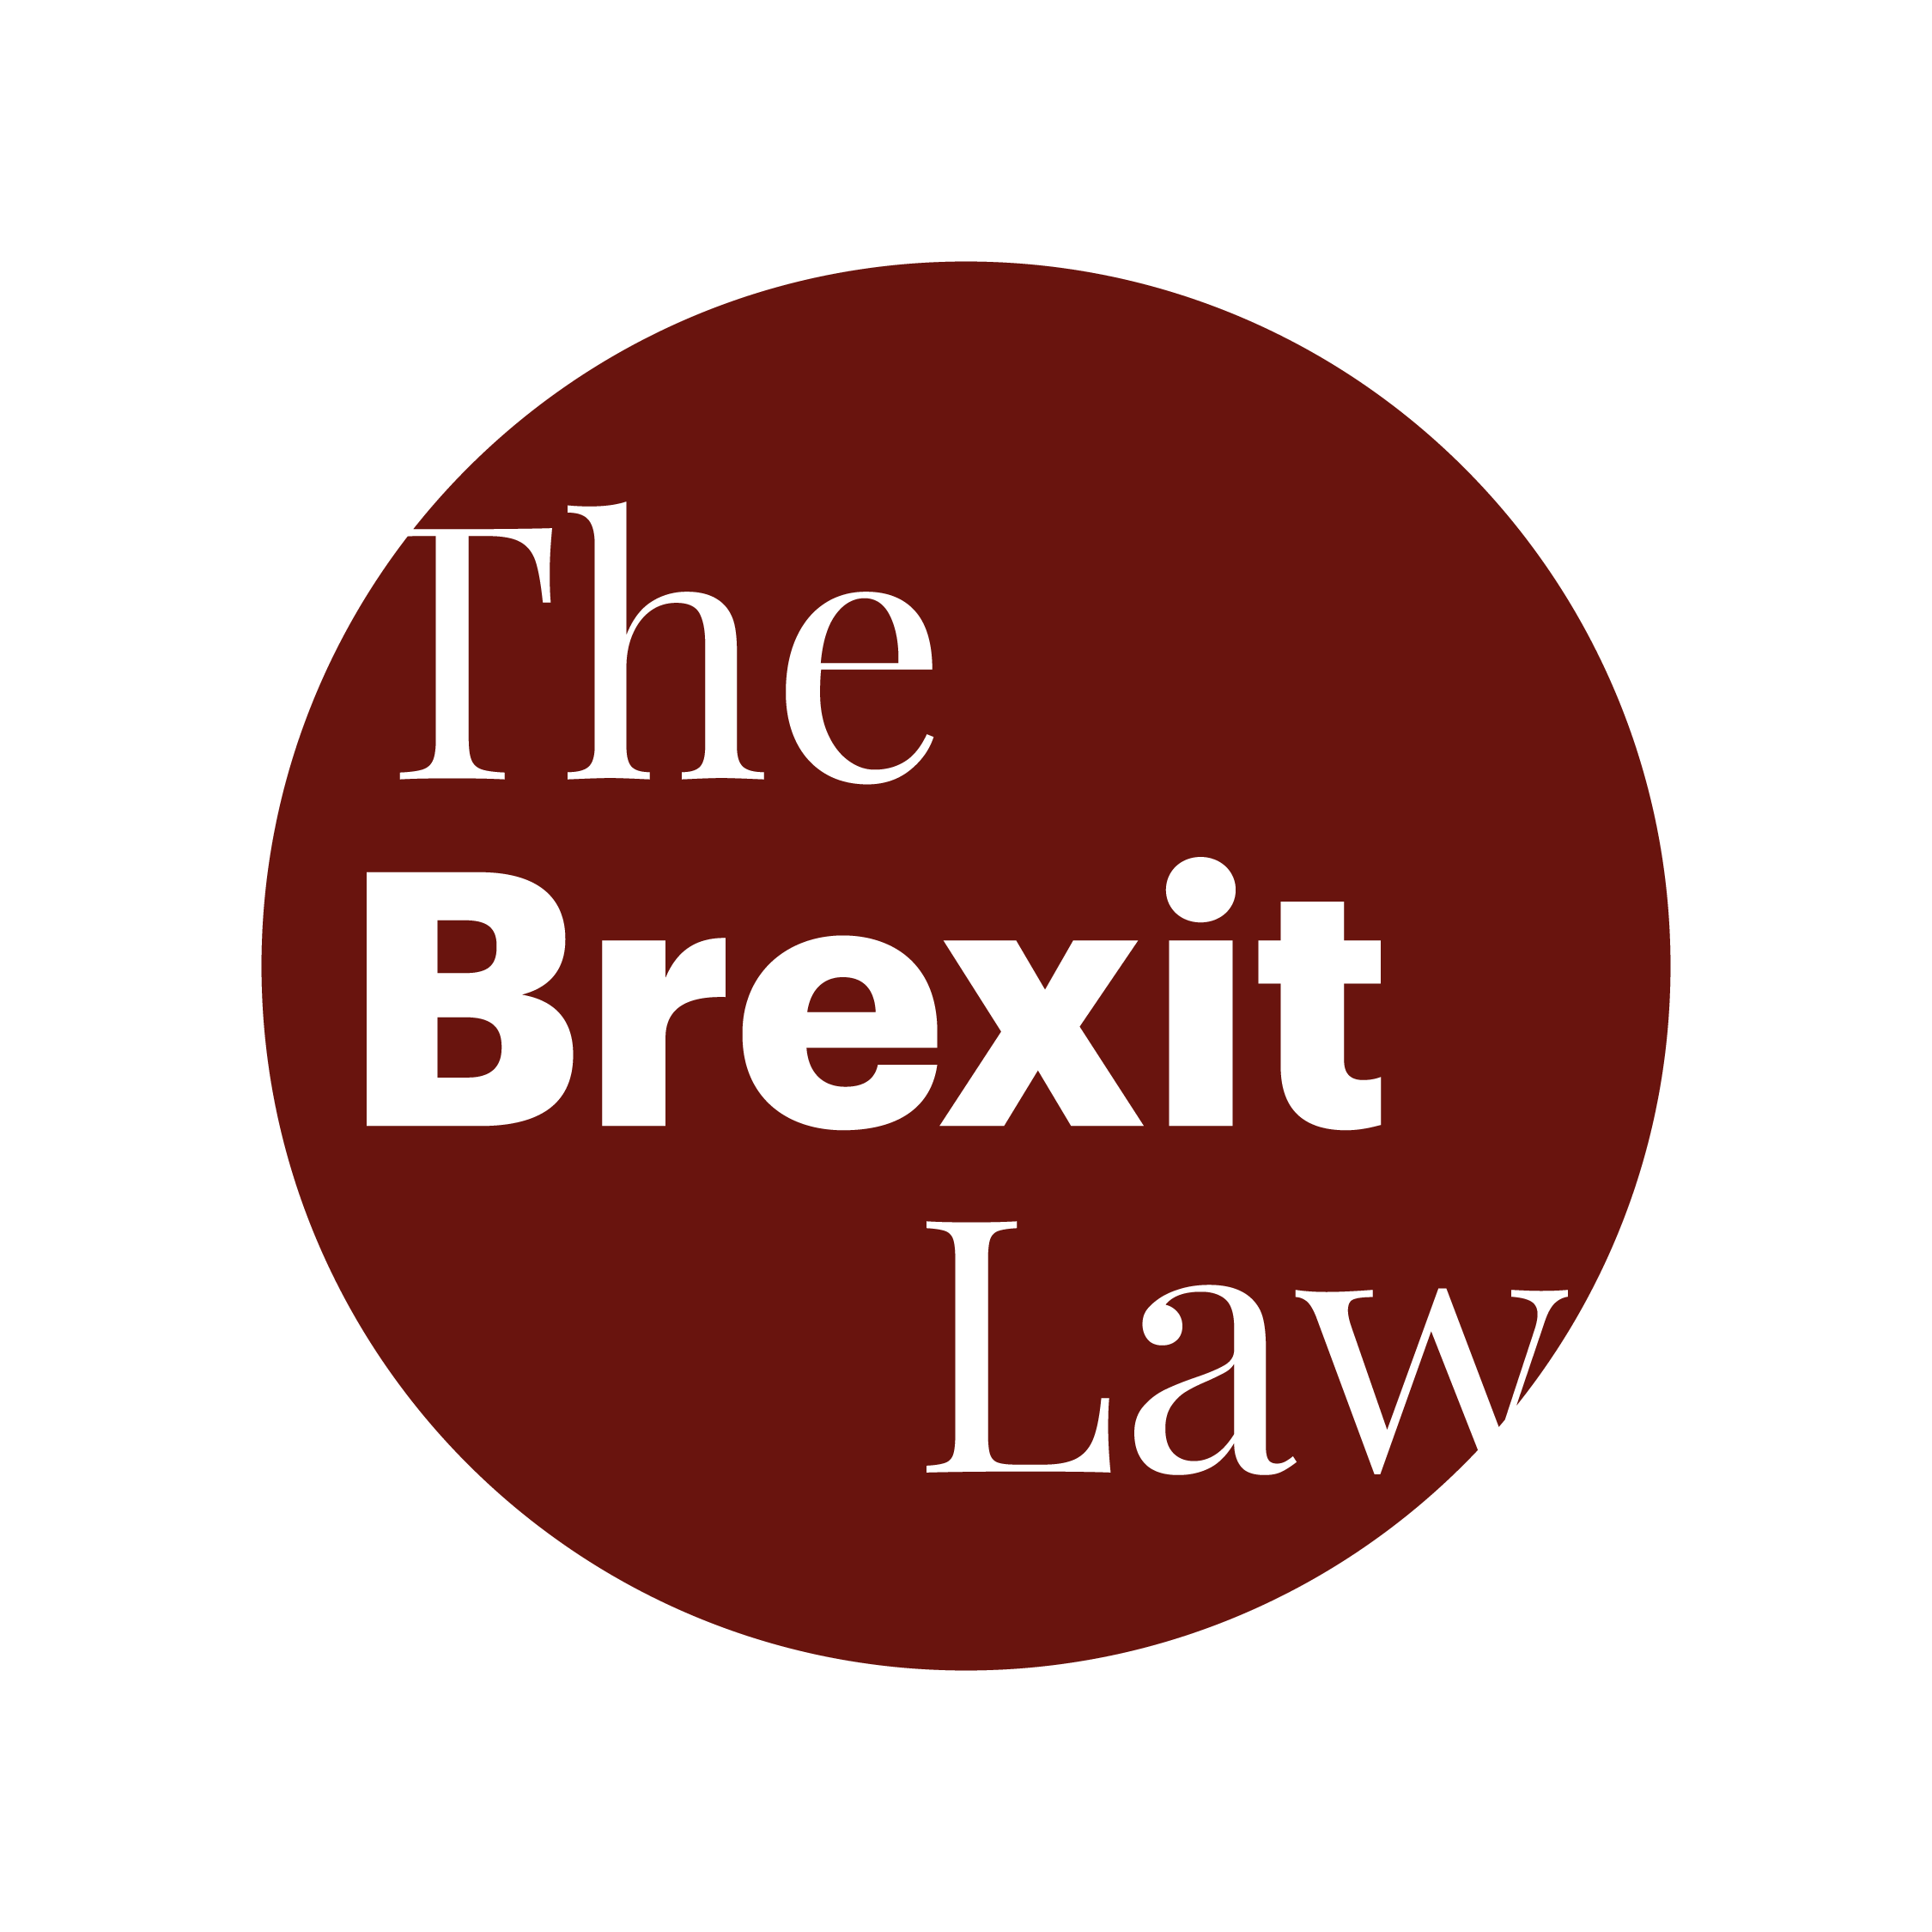 THE BREXIT LAW